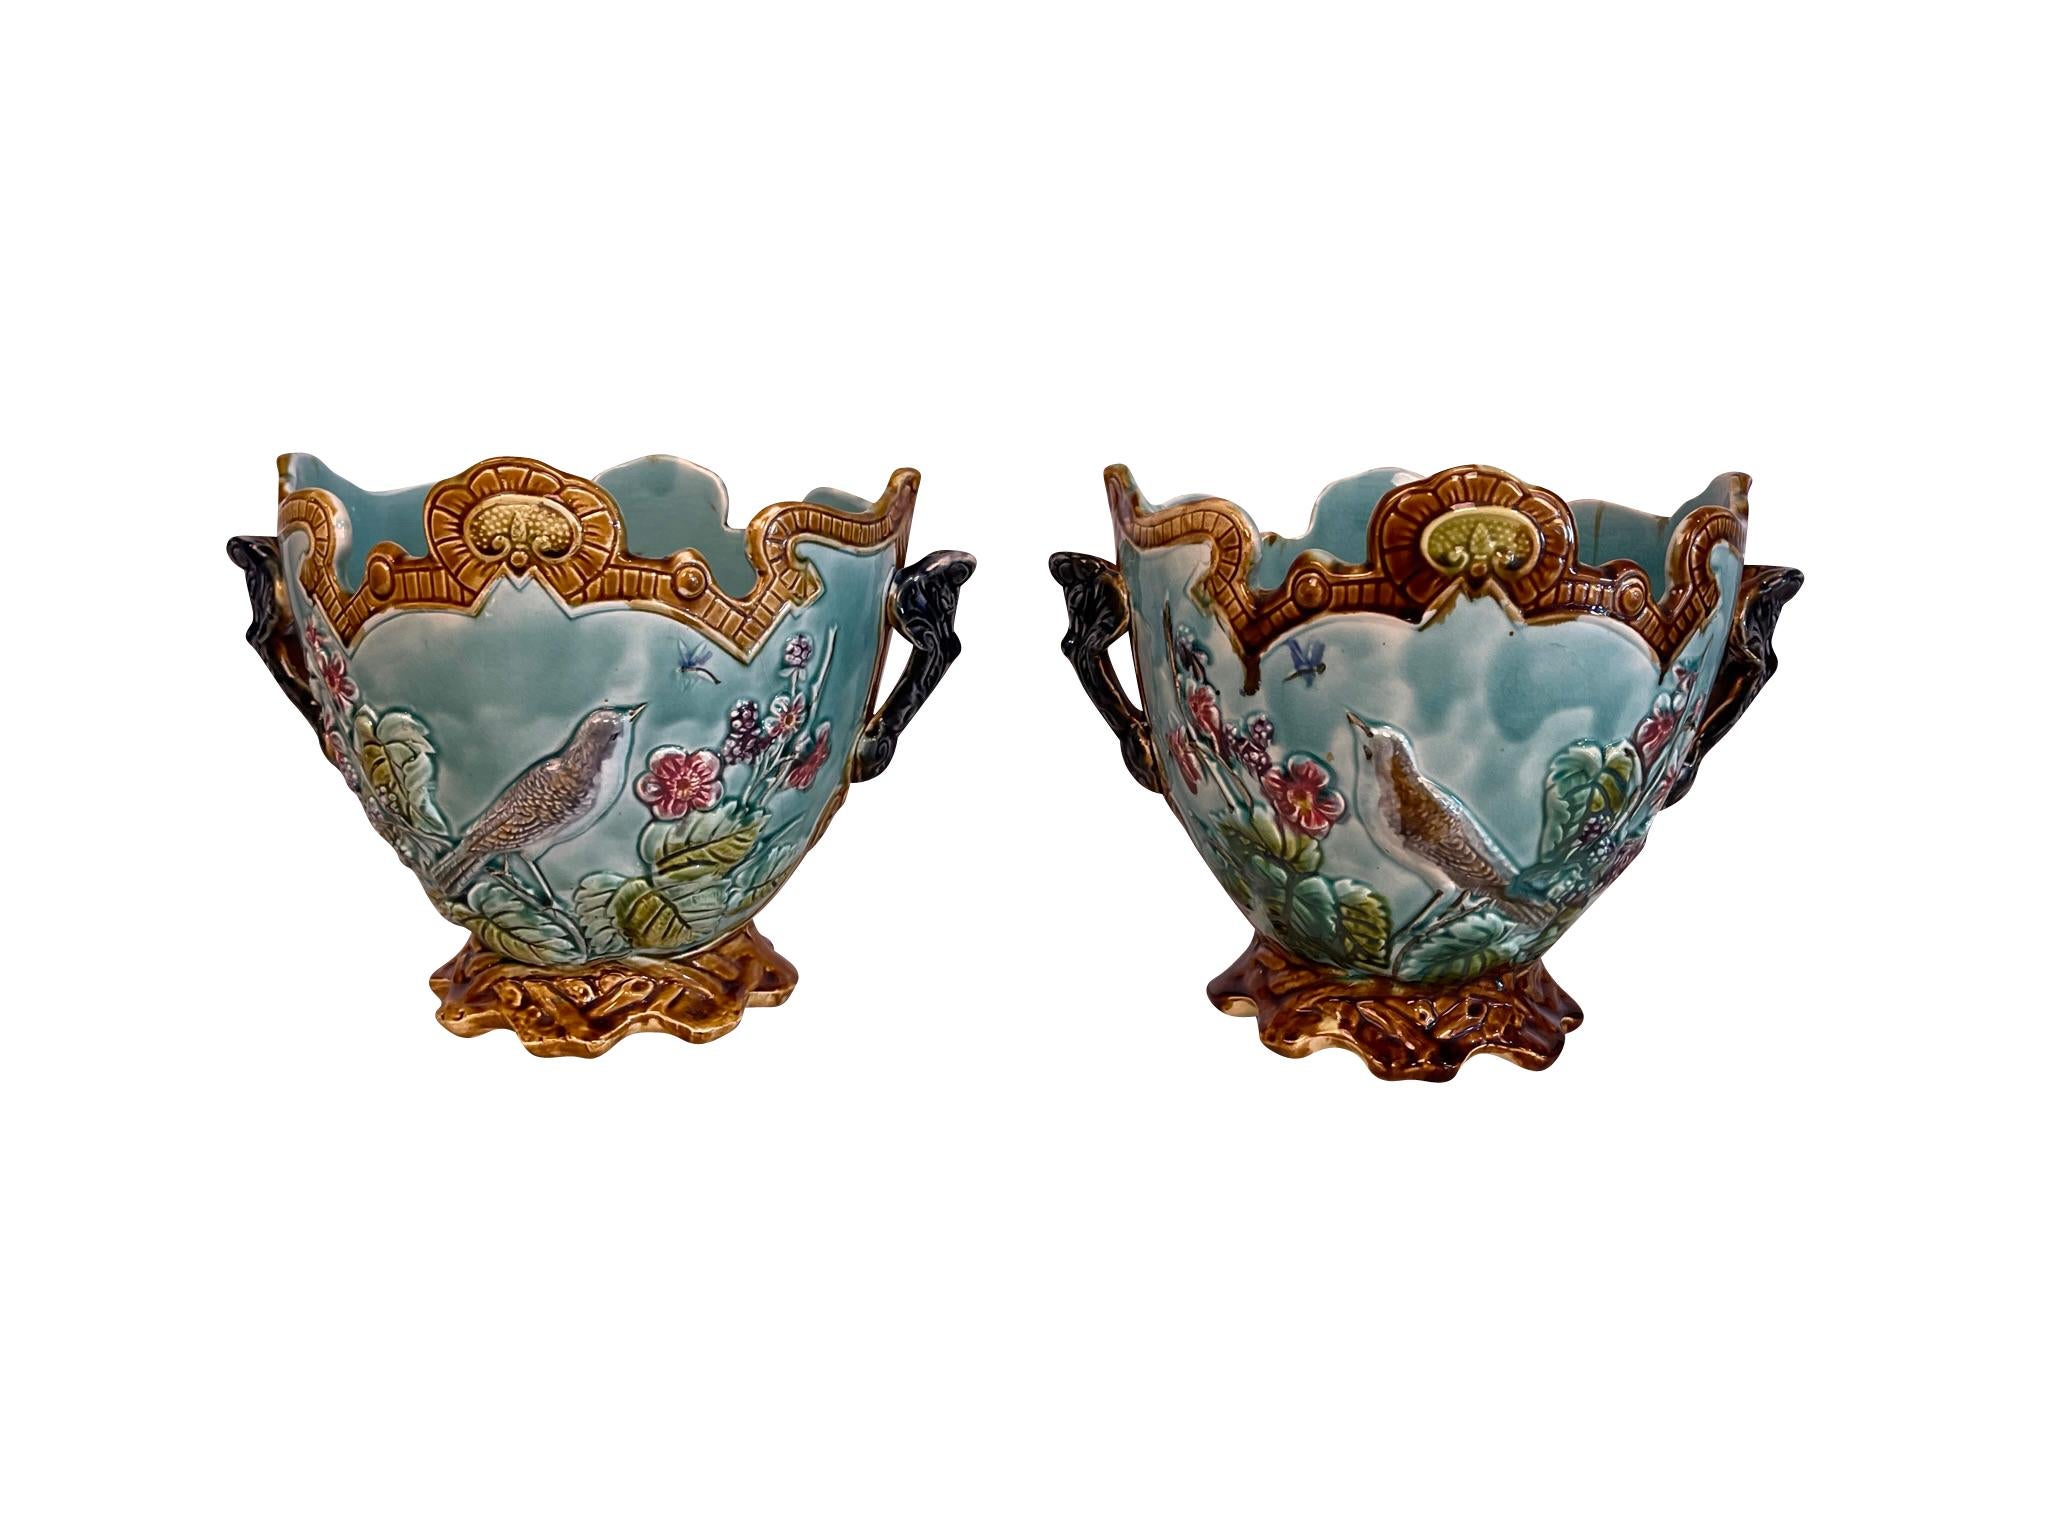 Decorate a table or a console with these colorful, antique Majolica planters. Created in France circa 1880, the sculptural ceramic cachepot stands on tree branch-shaped feet; the pot is decorated with hand-painted flowers and birds with green leaf